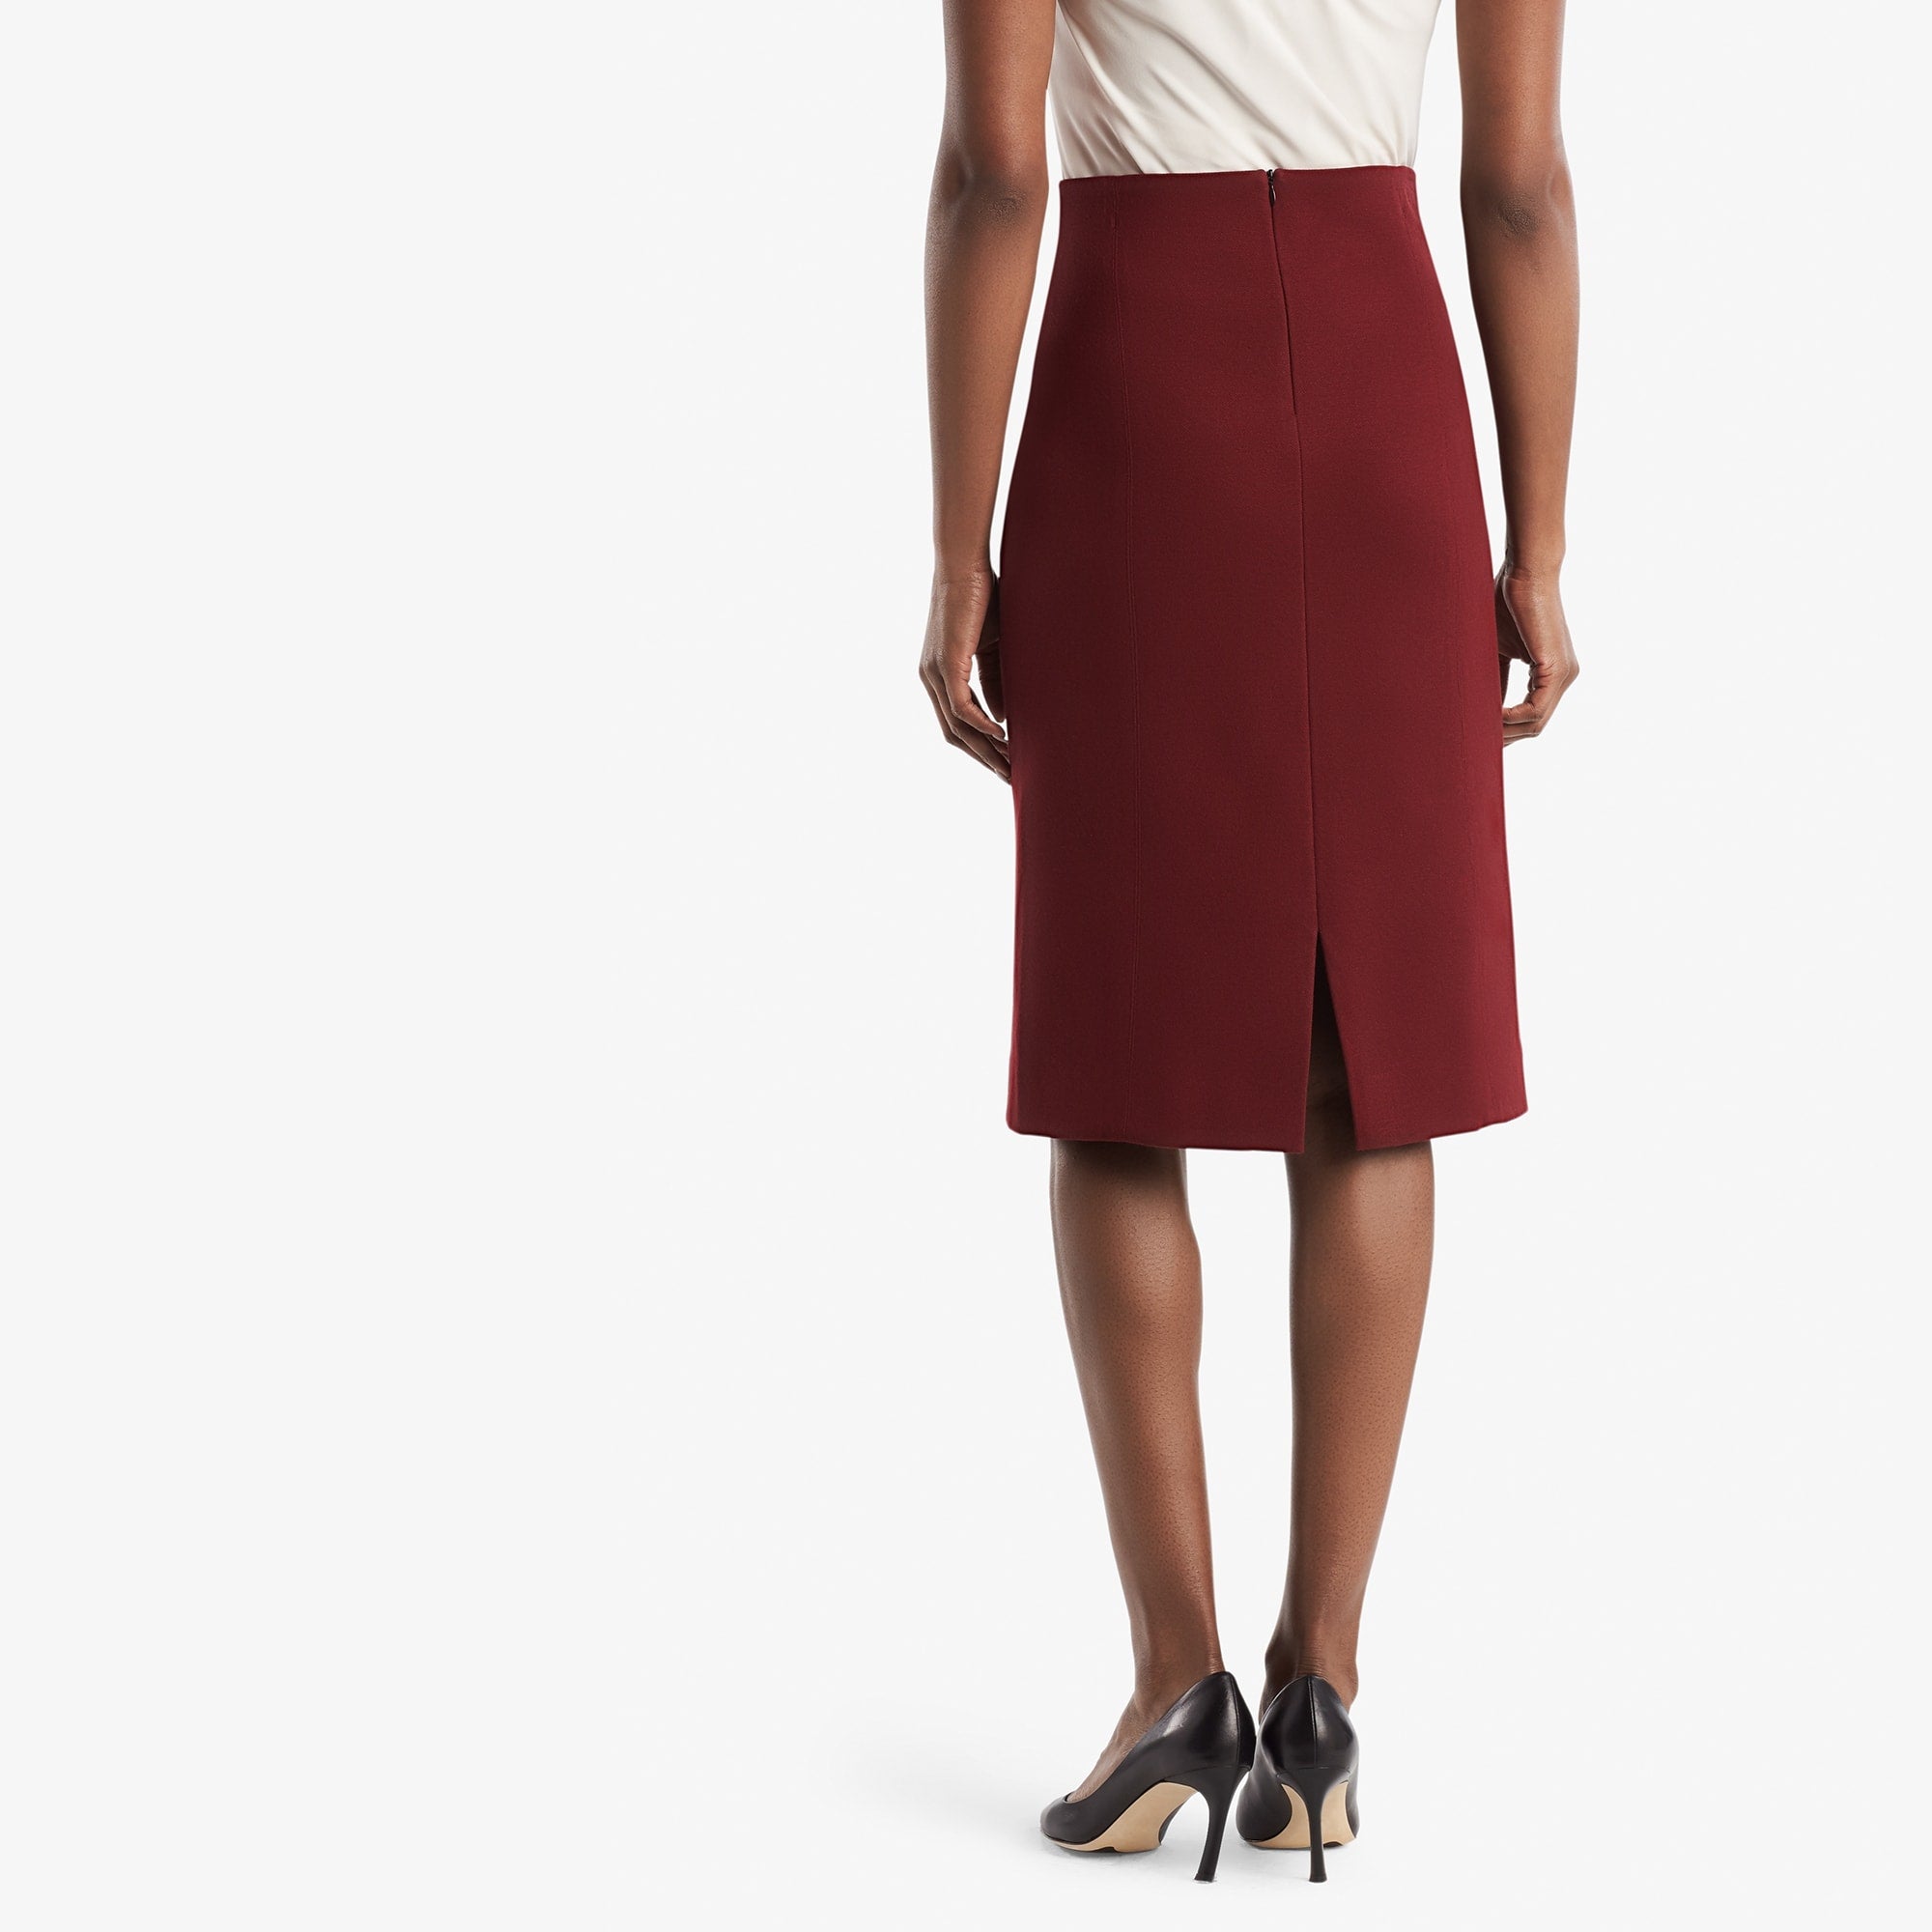 Back image of a woman standing wearing the Dorchester skirt in pinot